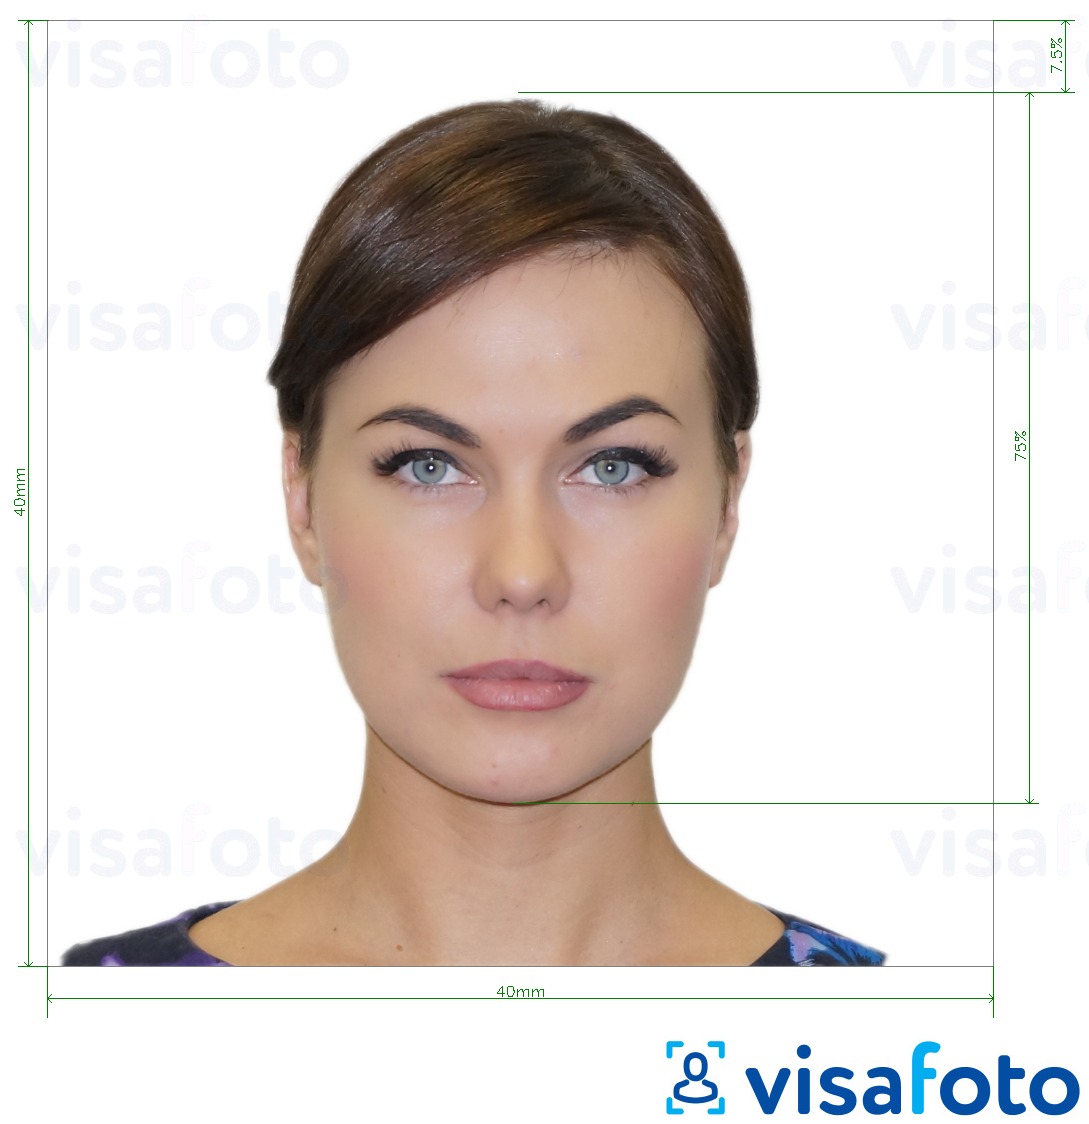 Example of photo for Italy Passport 40x40 mm (LA consulate) 4x4 cm with exact size specification